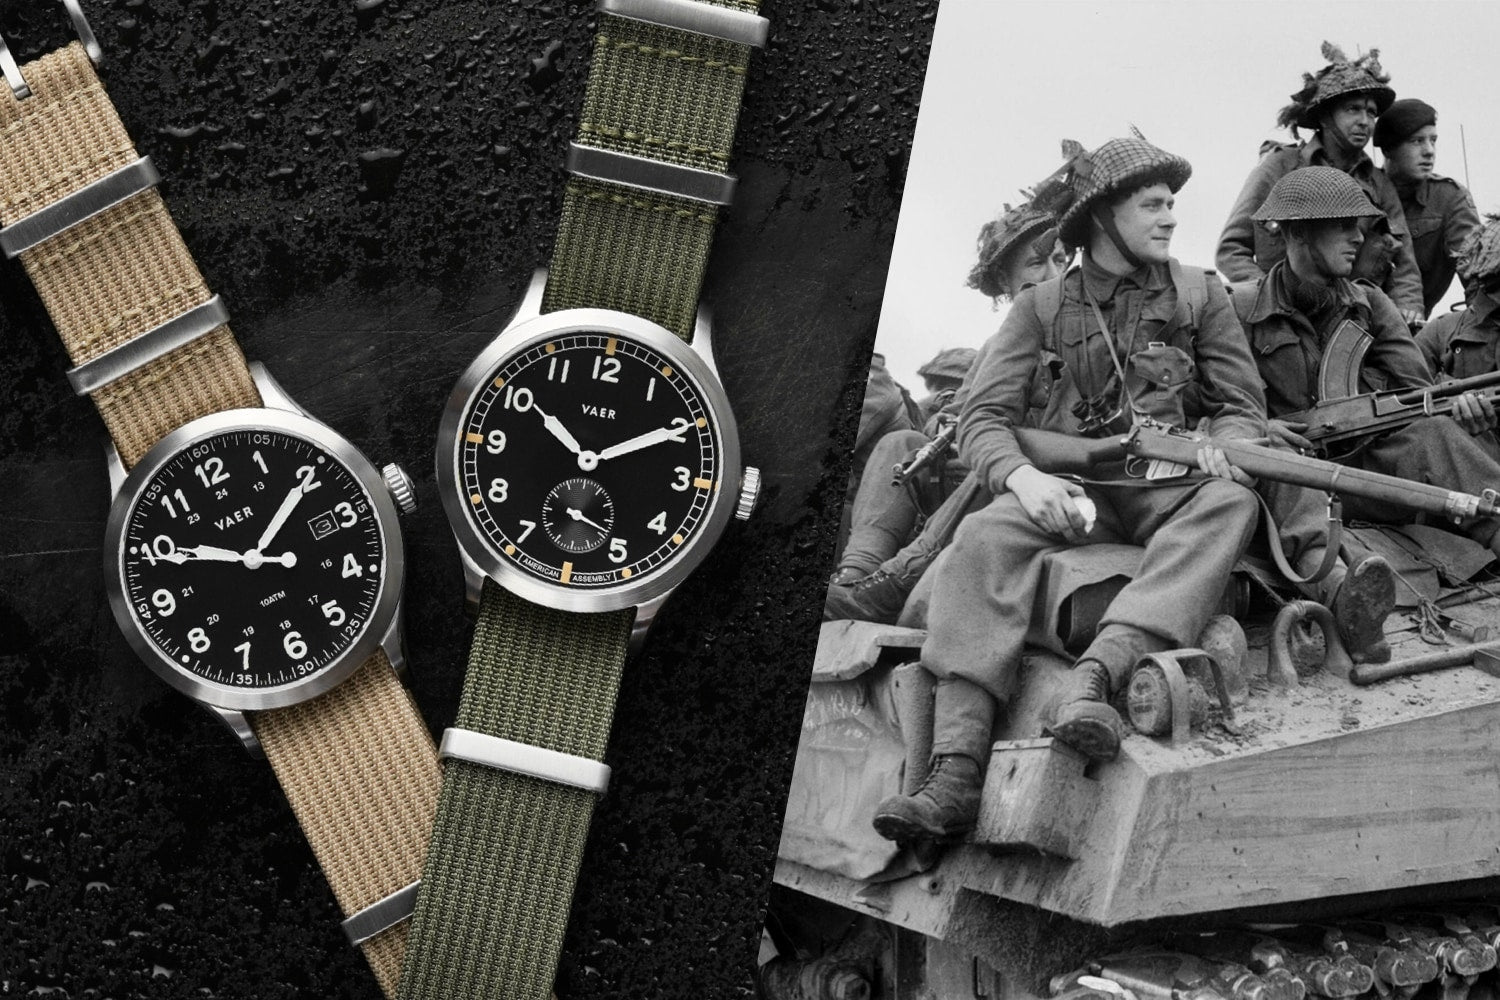 How Did Wristwatches Help the Allies Win WW2?